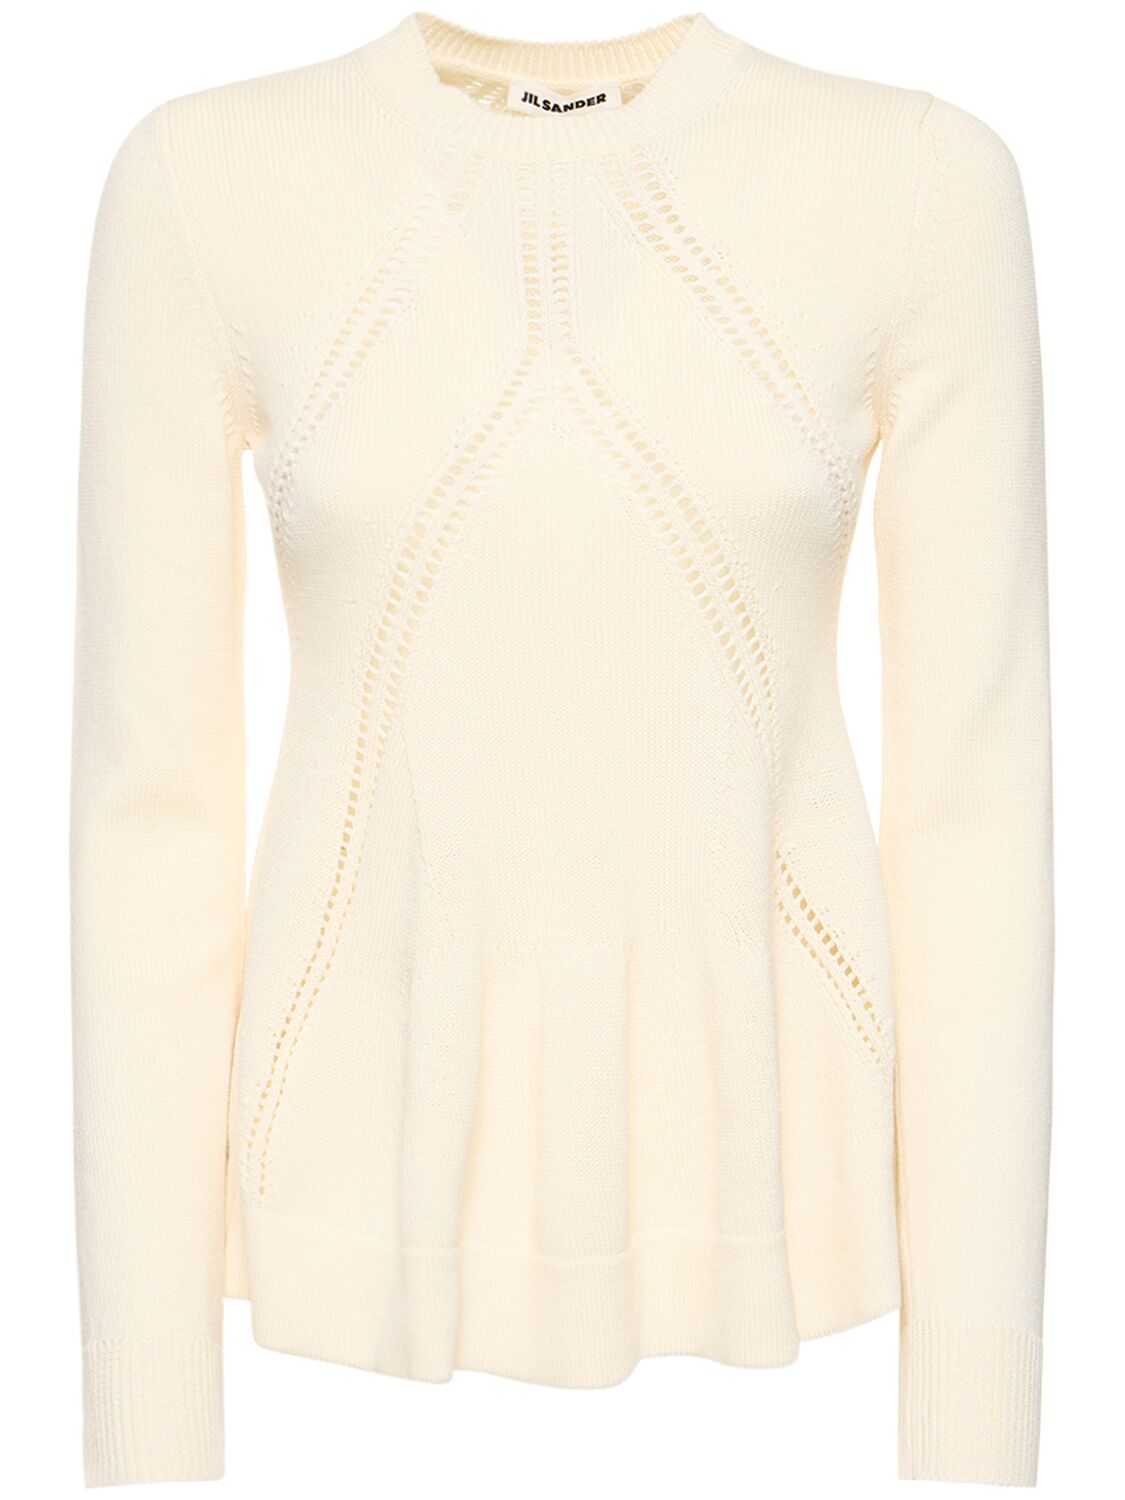 Image of Pointelle Knit Wool & Cotton Sweater